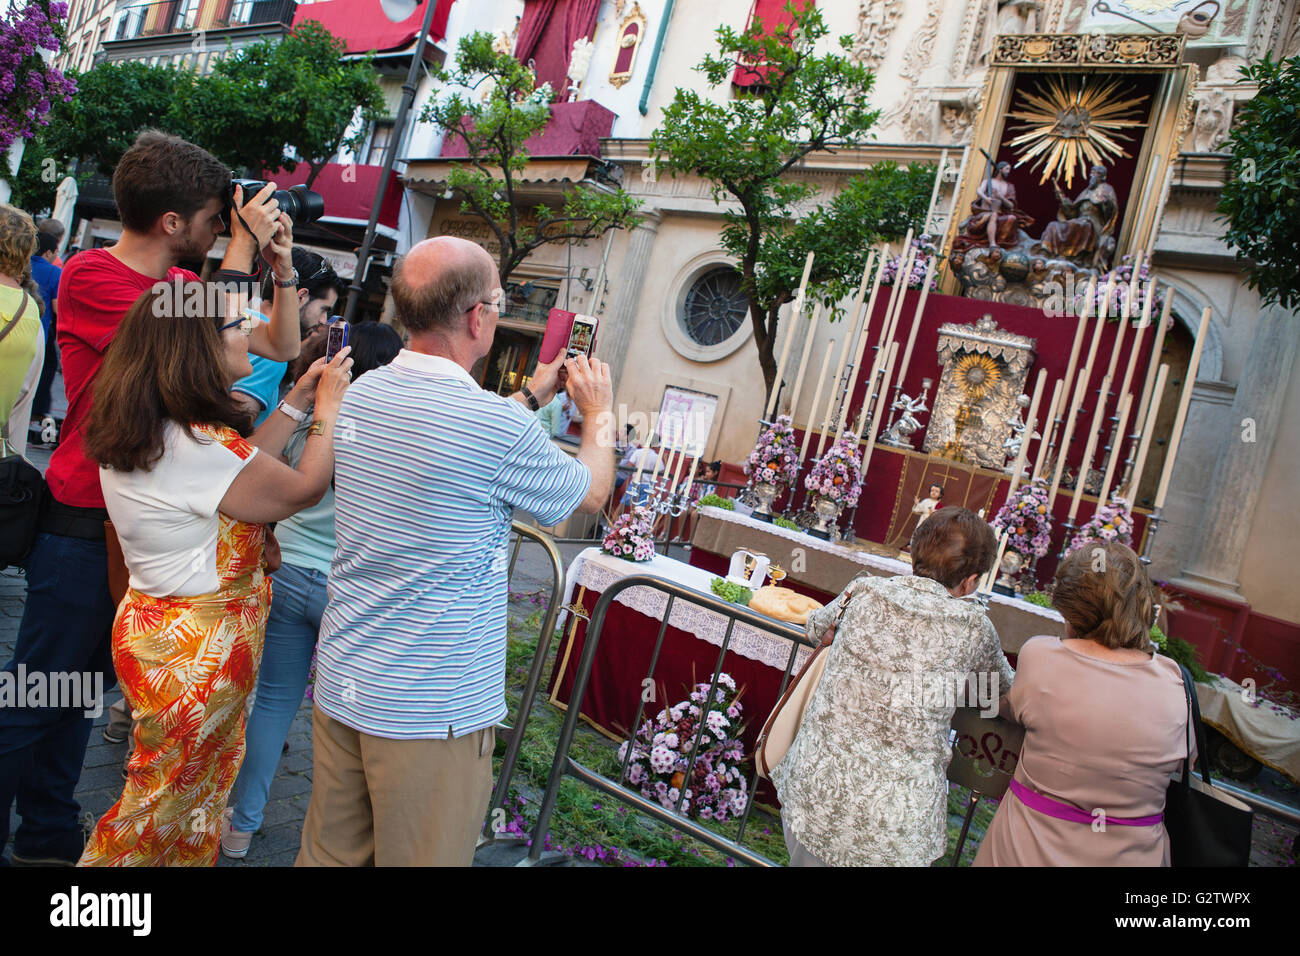 Spain, Andalucia, Seville, Worshippers take photographs of the temporary shrine in front of the Iglesia Colegial Divino Salvador that is on display to celebrate the feast of Corpus Christi. Stock Photo